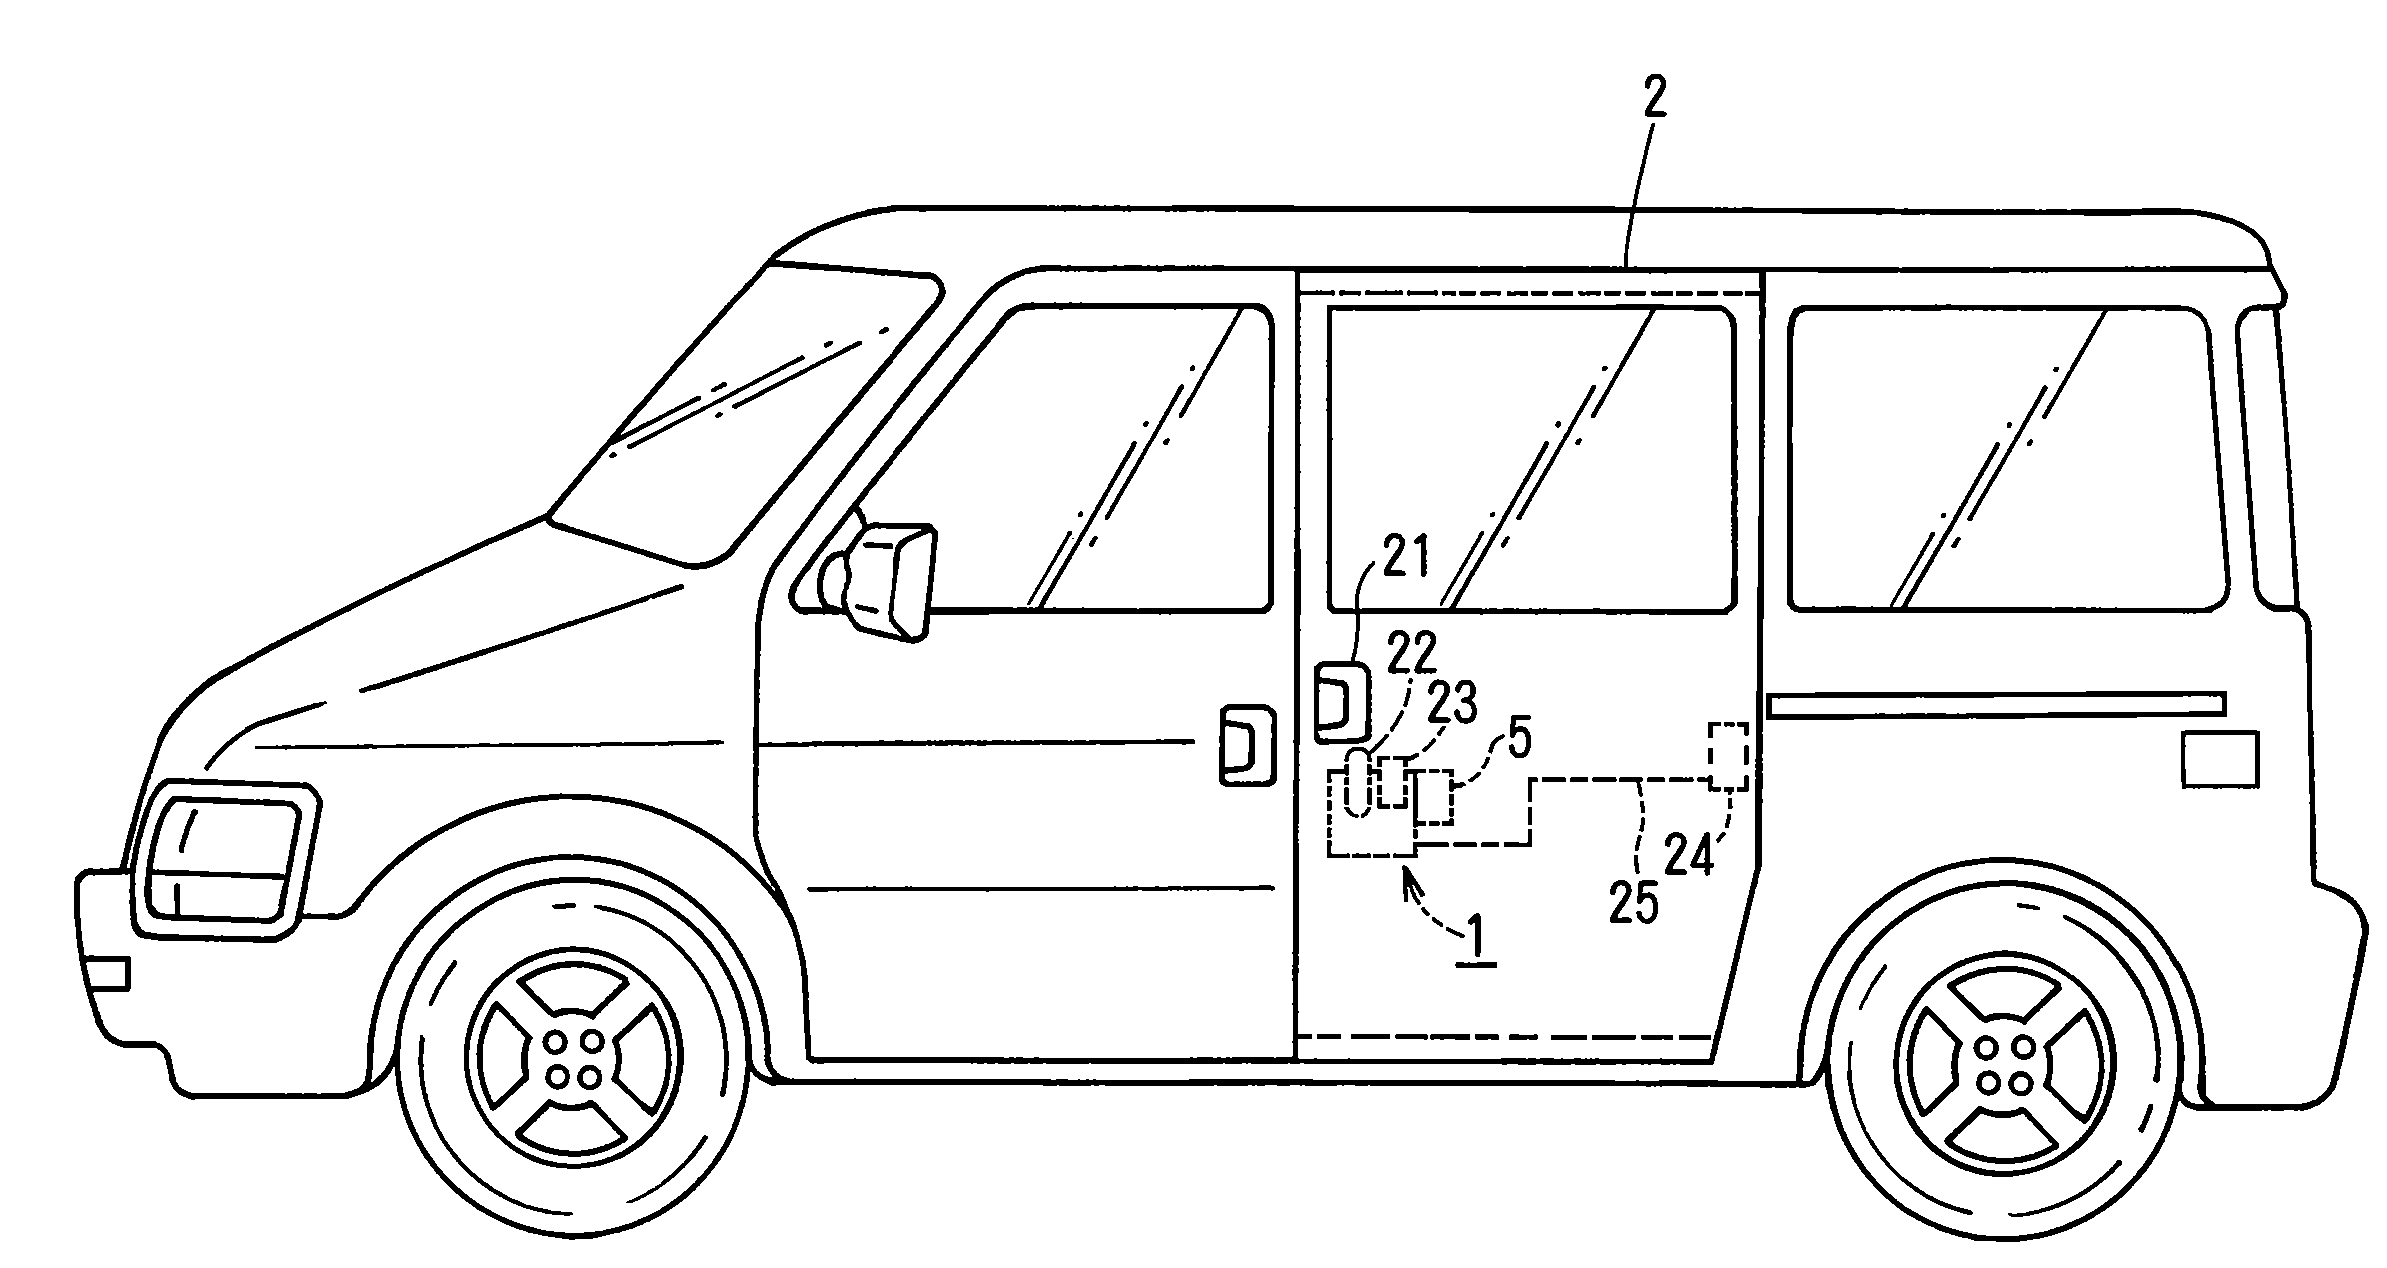 Operating device of a door latch in a vehicle